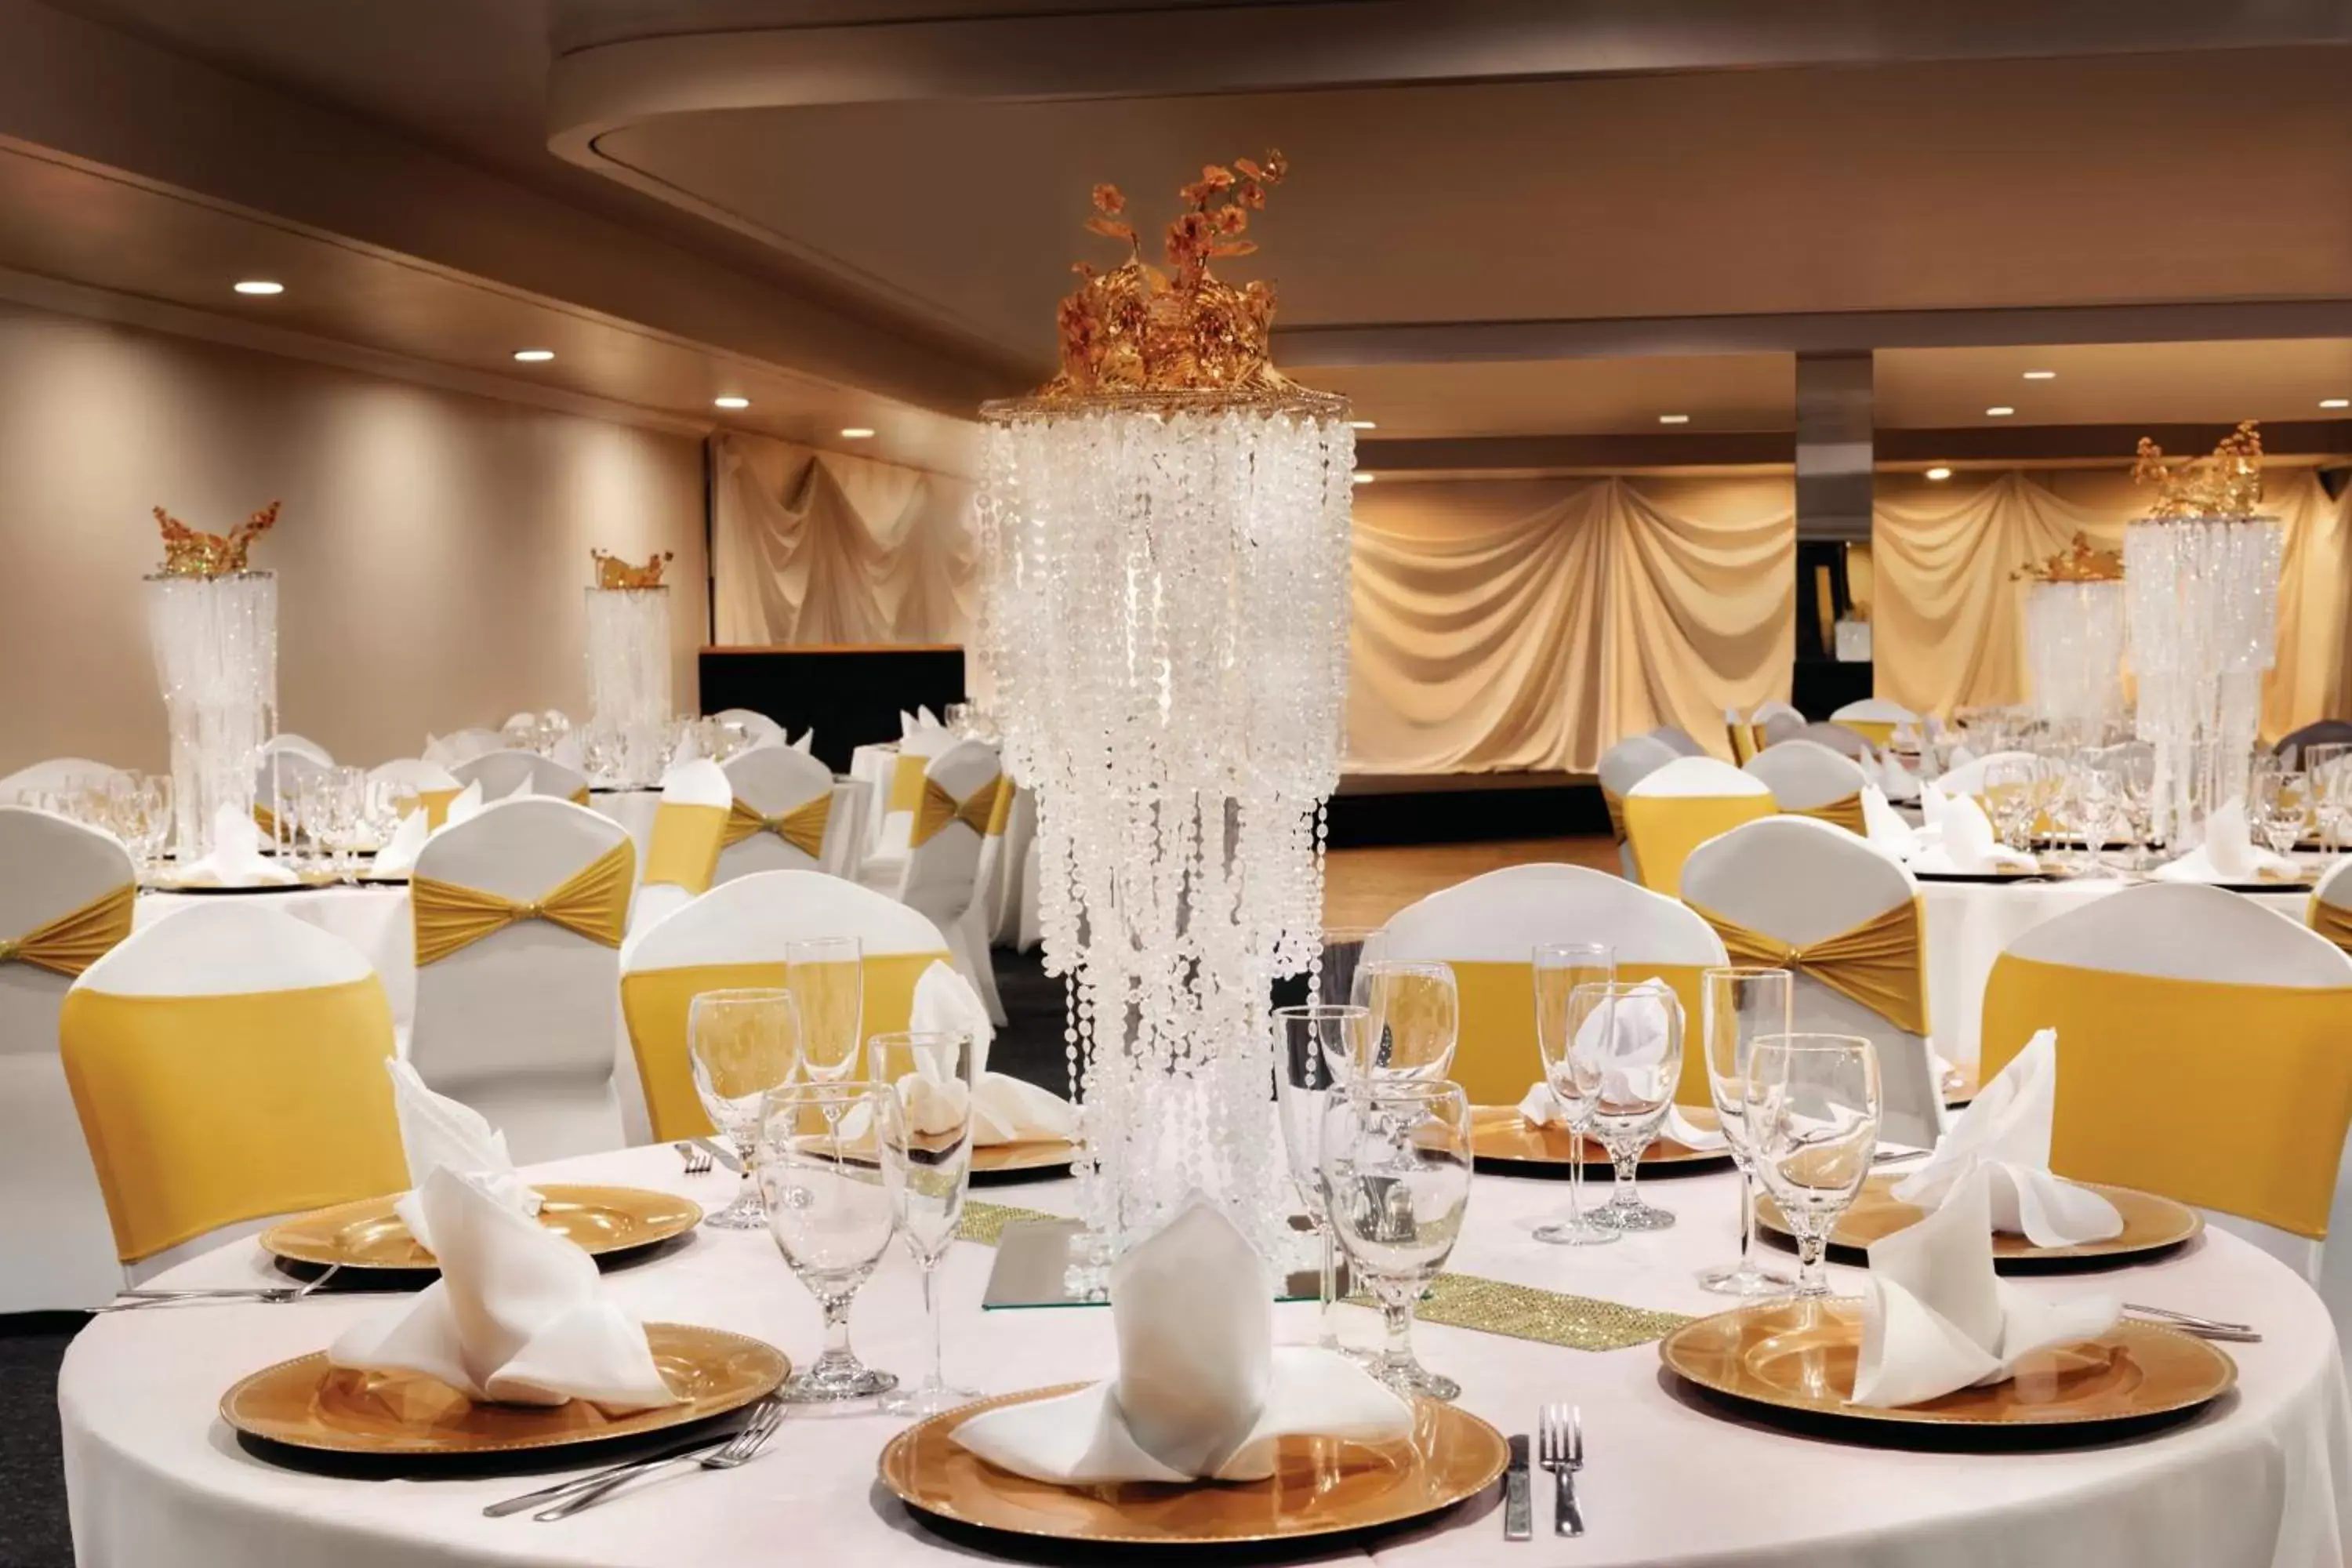 Banquet/Function facilities, Banquet Facilities in Radisson Hotel Charlotte Airport